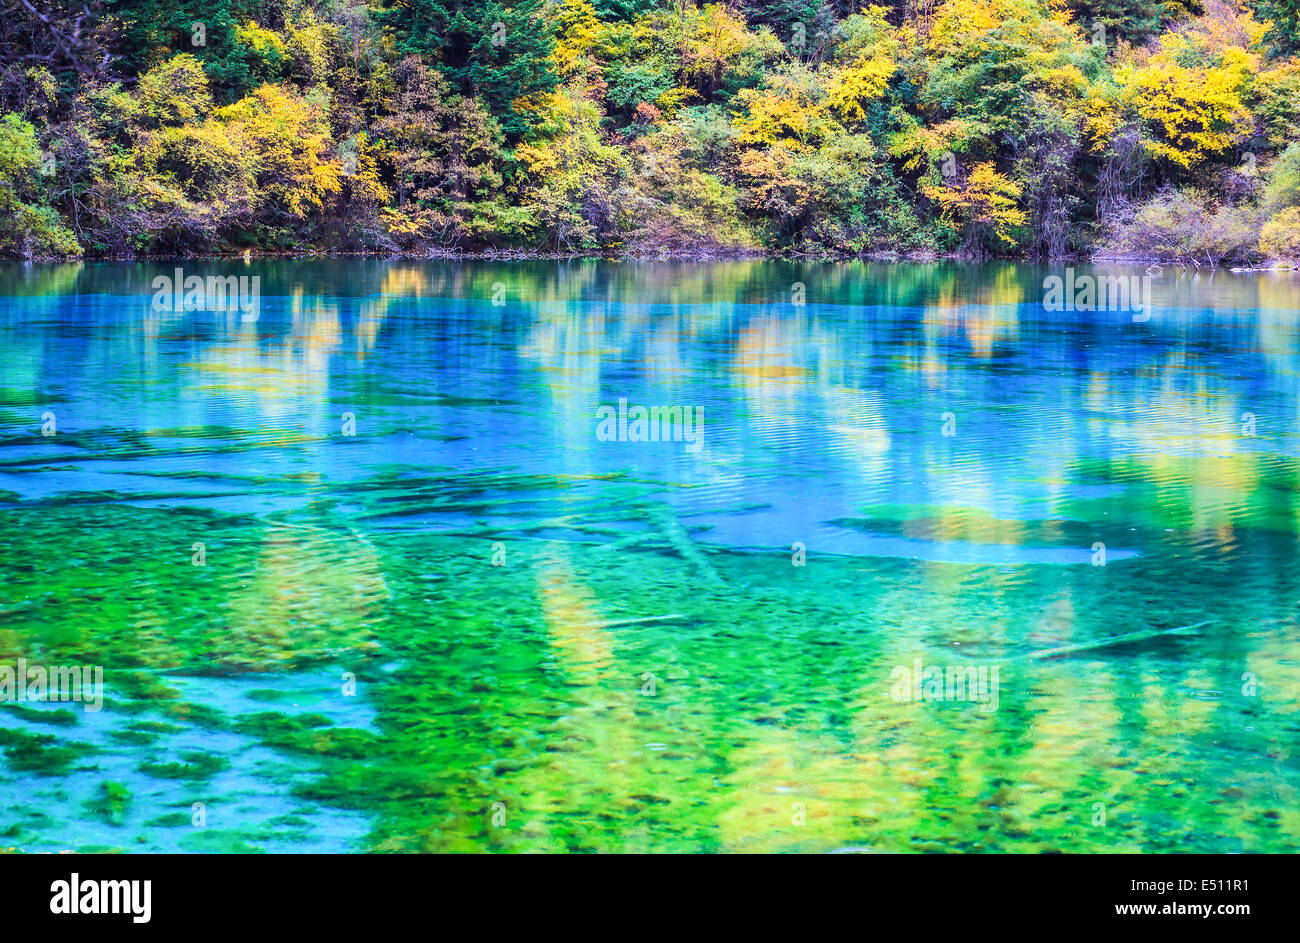 brilliant colors on the lake surface Stock Photo